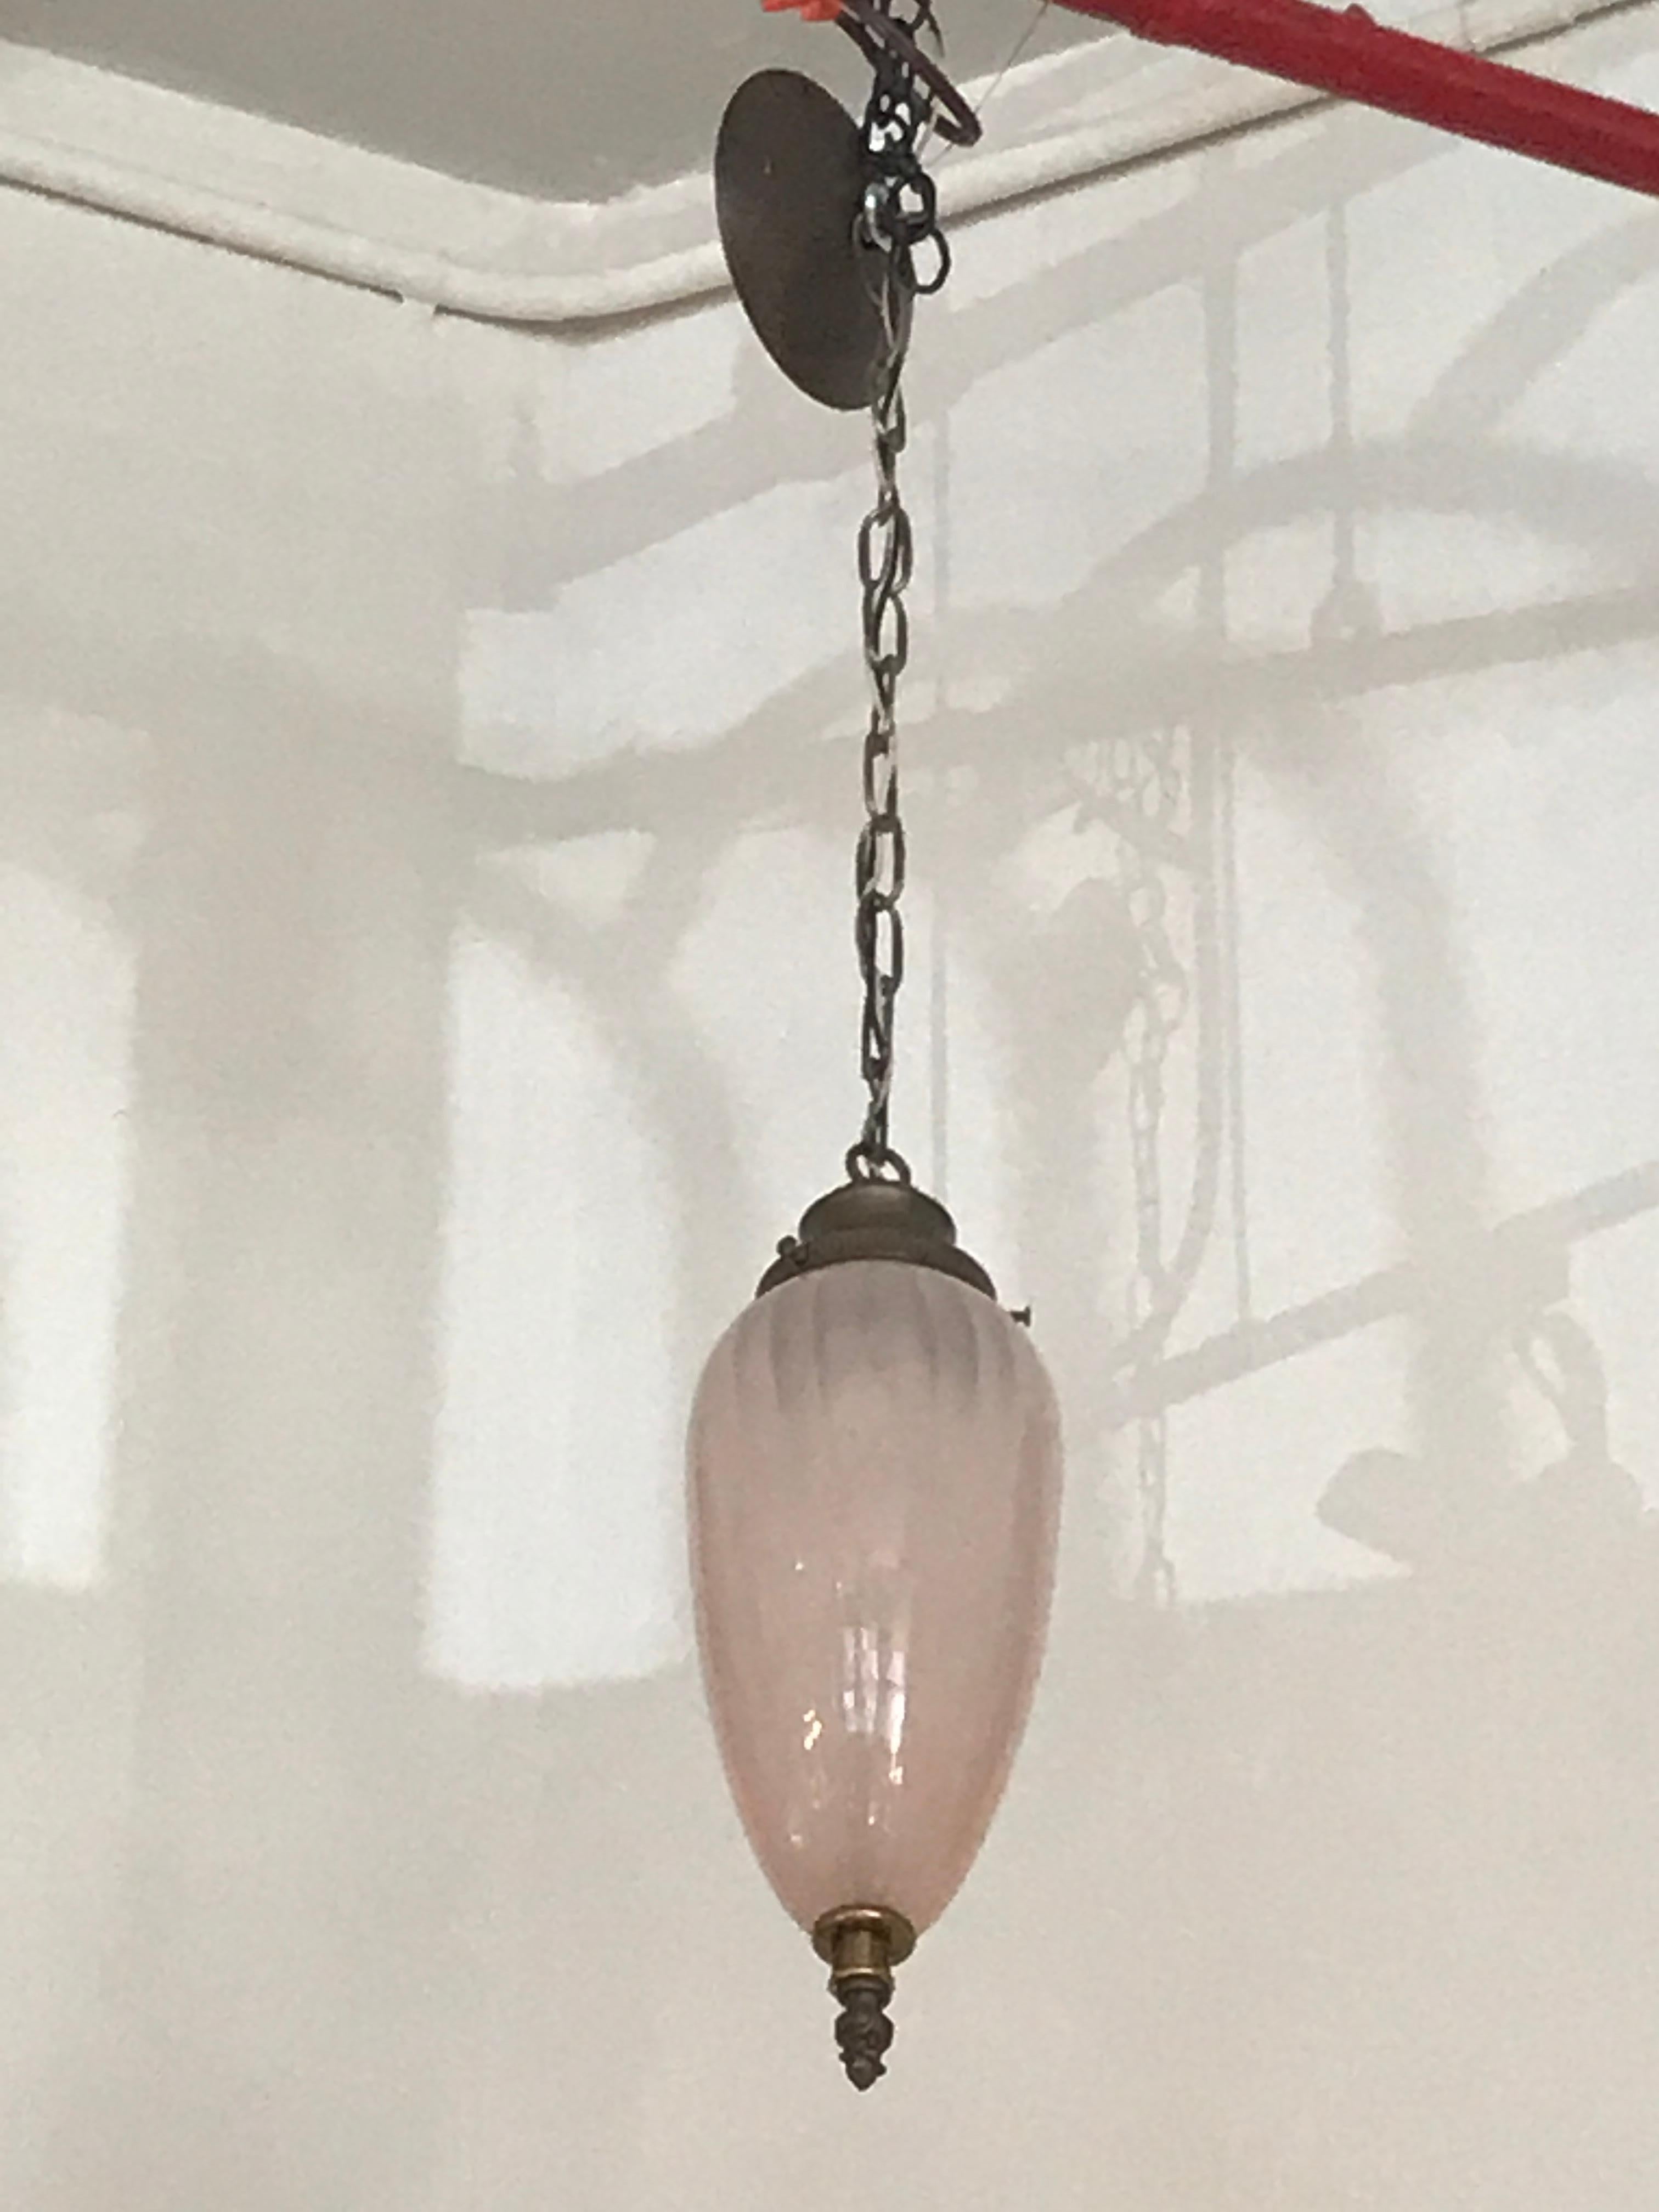 This elegantly vintage teardrop glass pendant brings a feminine touch with its pink hue milky glass. The subtle texture emphasis a timeless esthetic that would compliment many homes.

Measure: Overall length 37